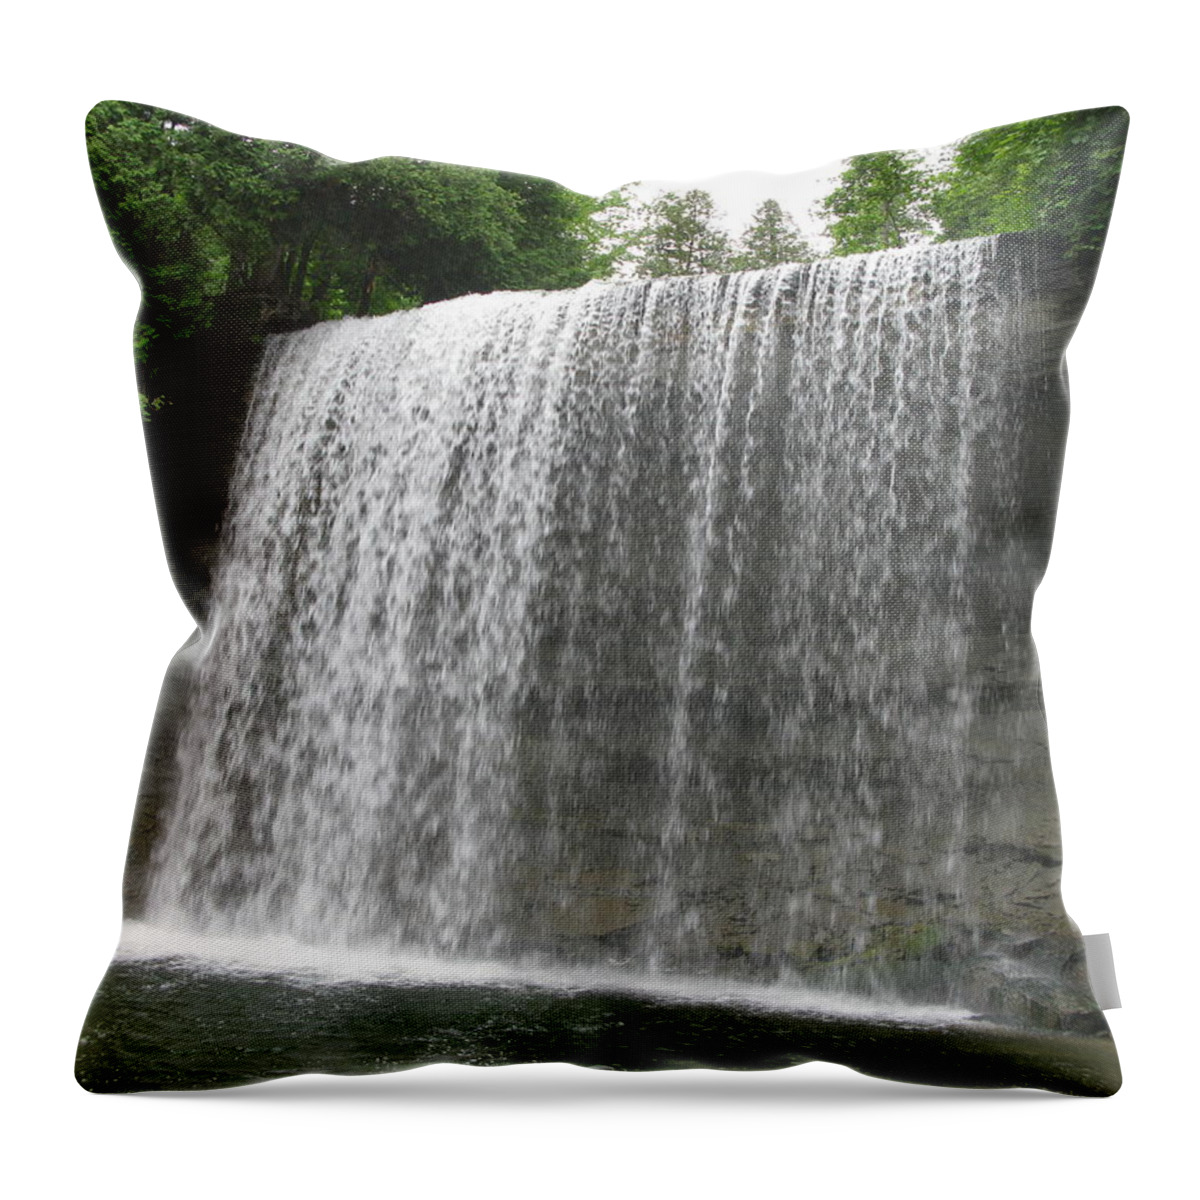 Waterfall Throw Pillow featuring the photograph Bridal Veil Falls by David Barker